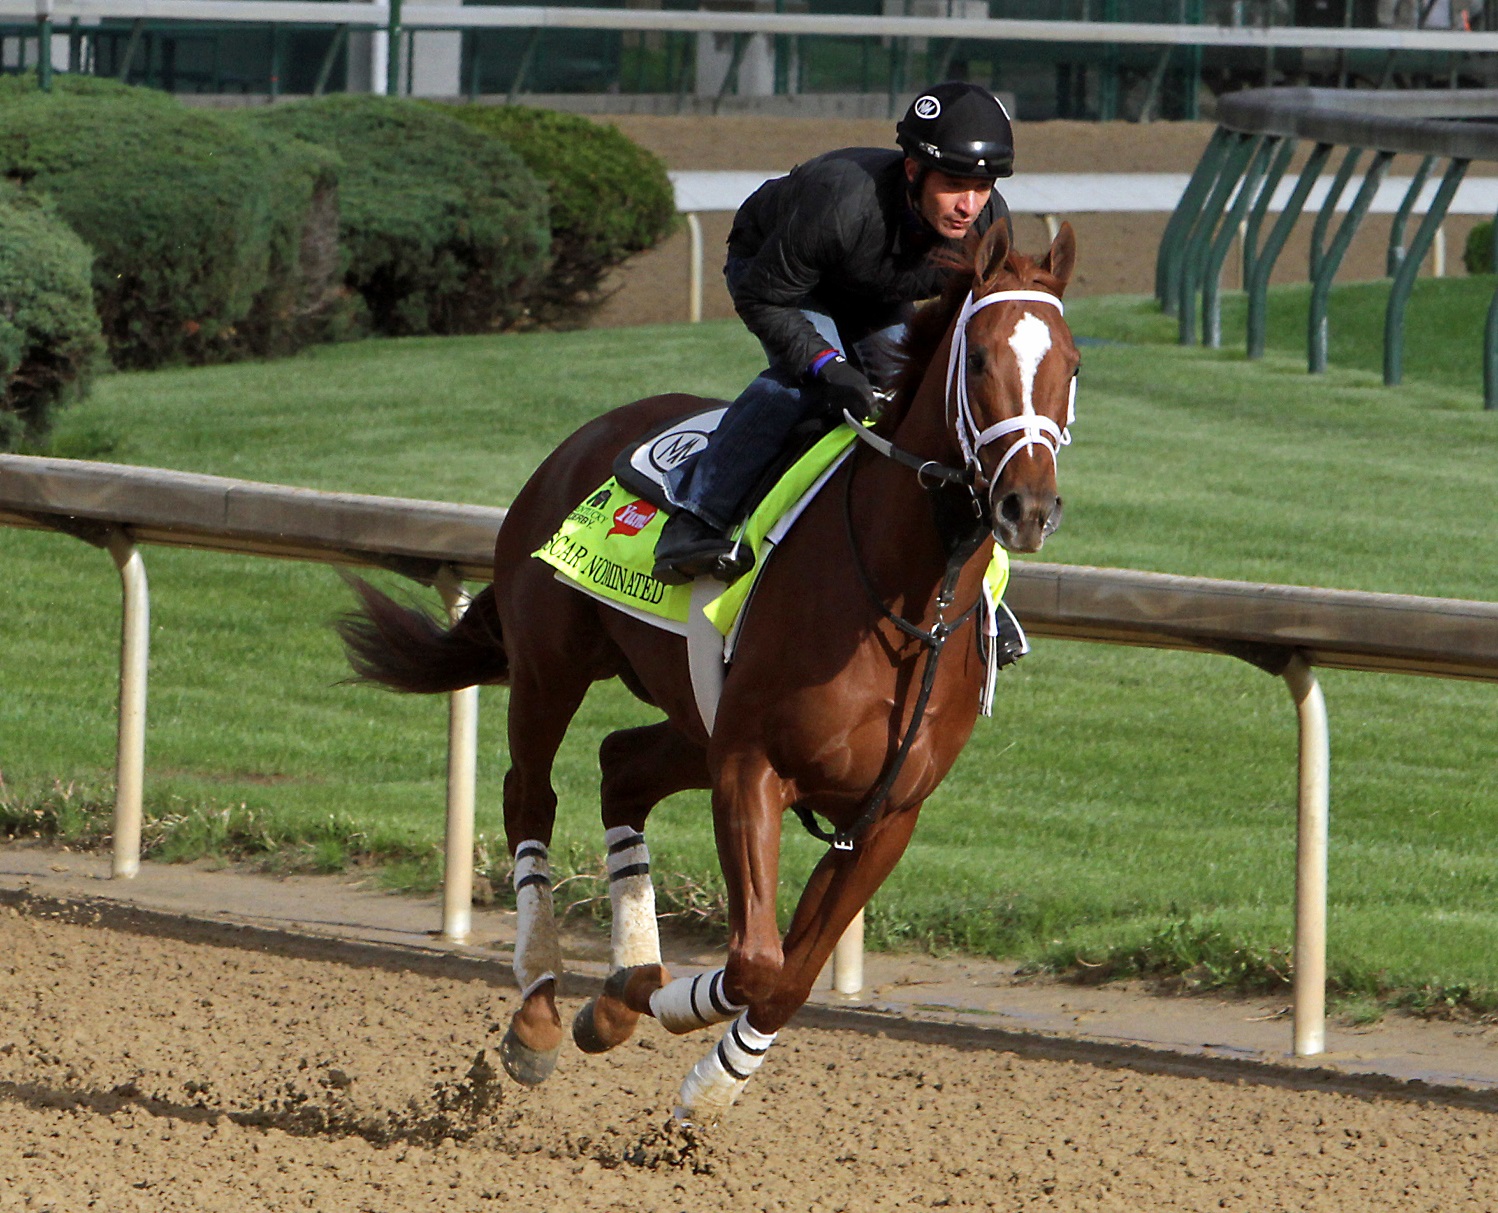 Kentucky Derby entrant Oscar Nominated, ridden by exercise rider Joel Cano, gallops at Churchill Downs in Louisville, Ky., Thursday, May 5, 2016. The 142nd Kentucky Derby is Saturday, May 7. (AP Photo/Garry Jones)